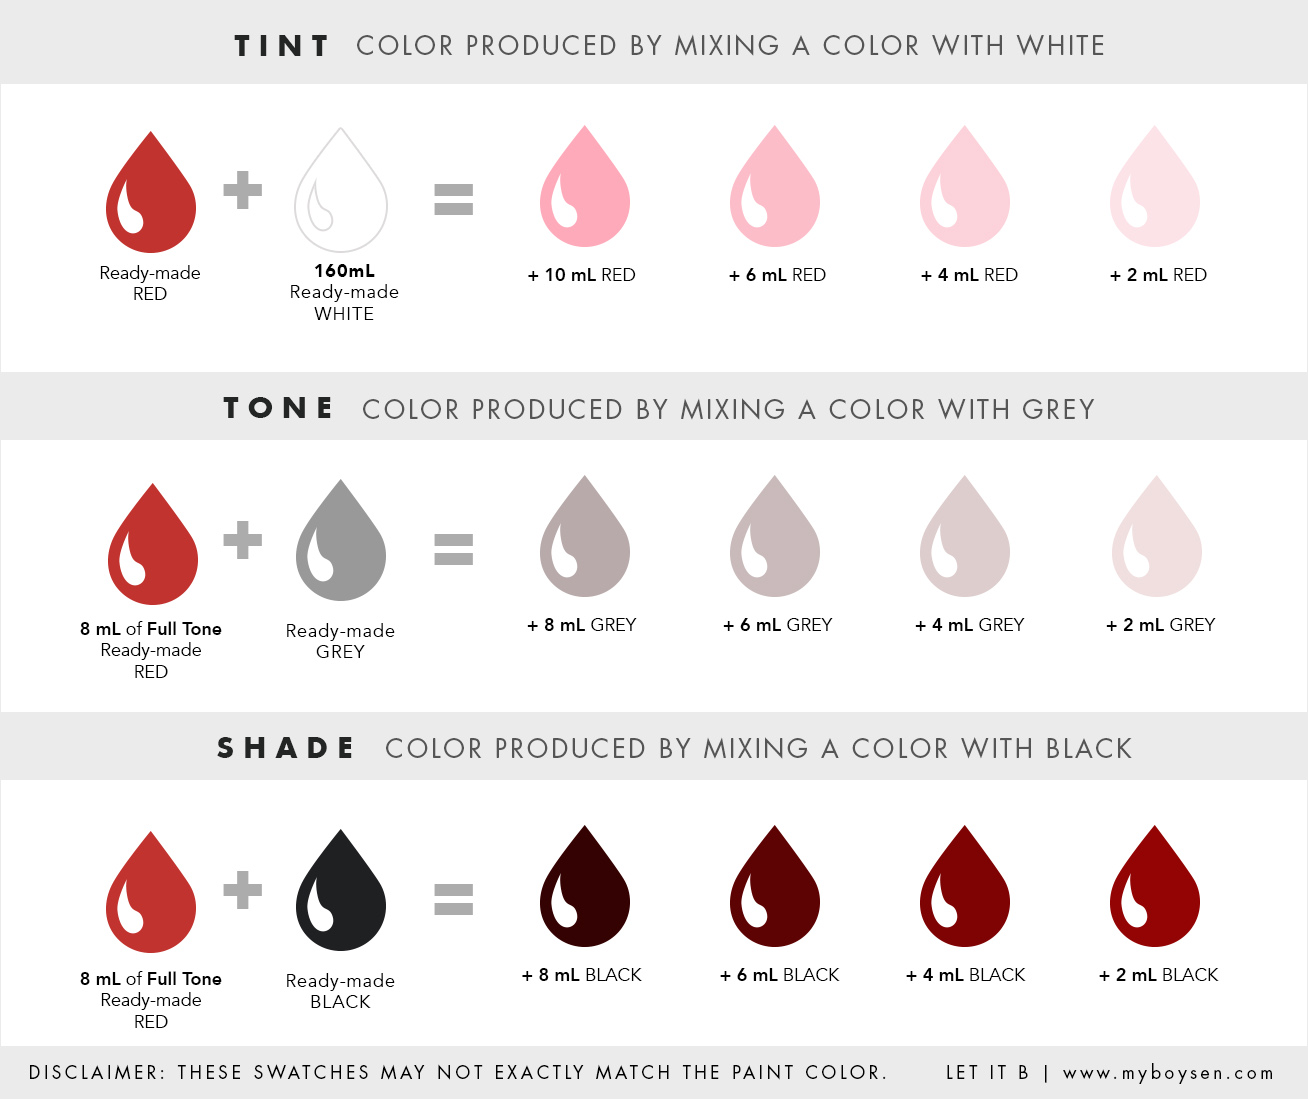 Color Me Boysen Series: How to Mix Colors for Tint and Tone | MyBoysen